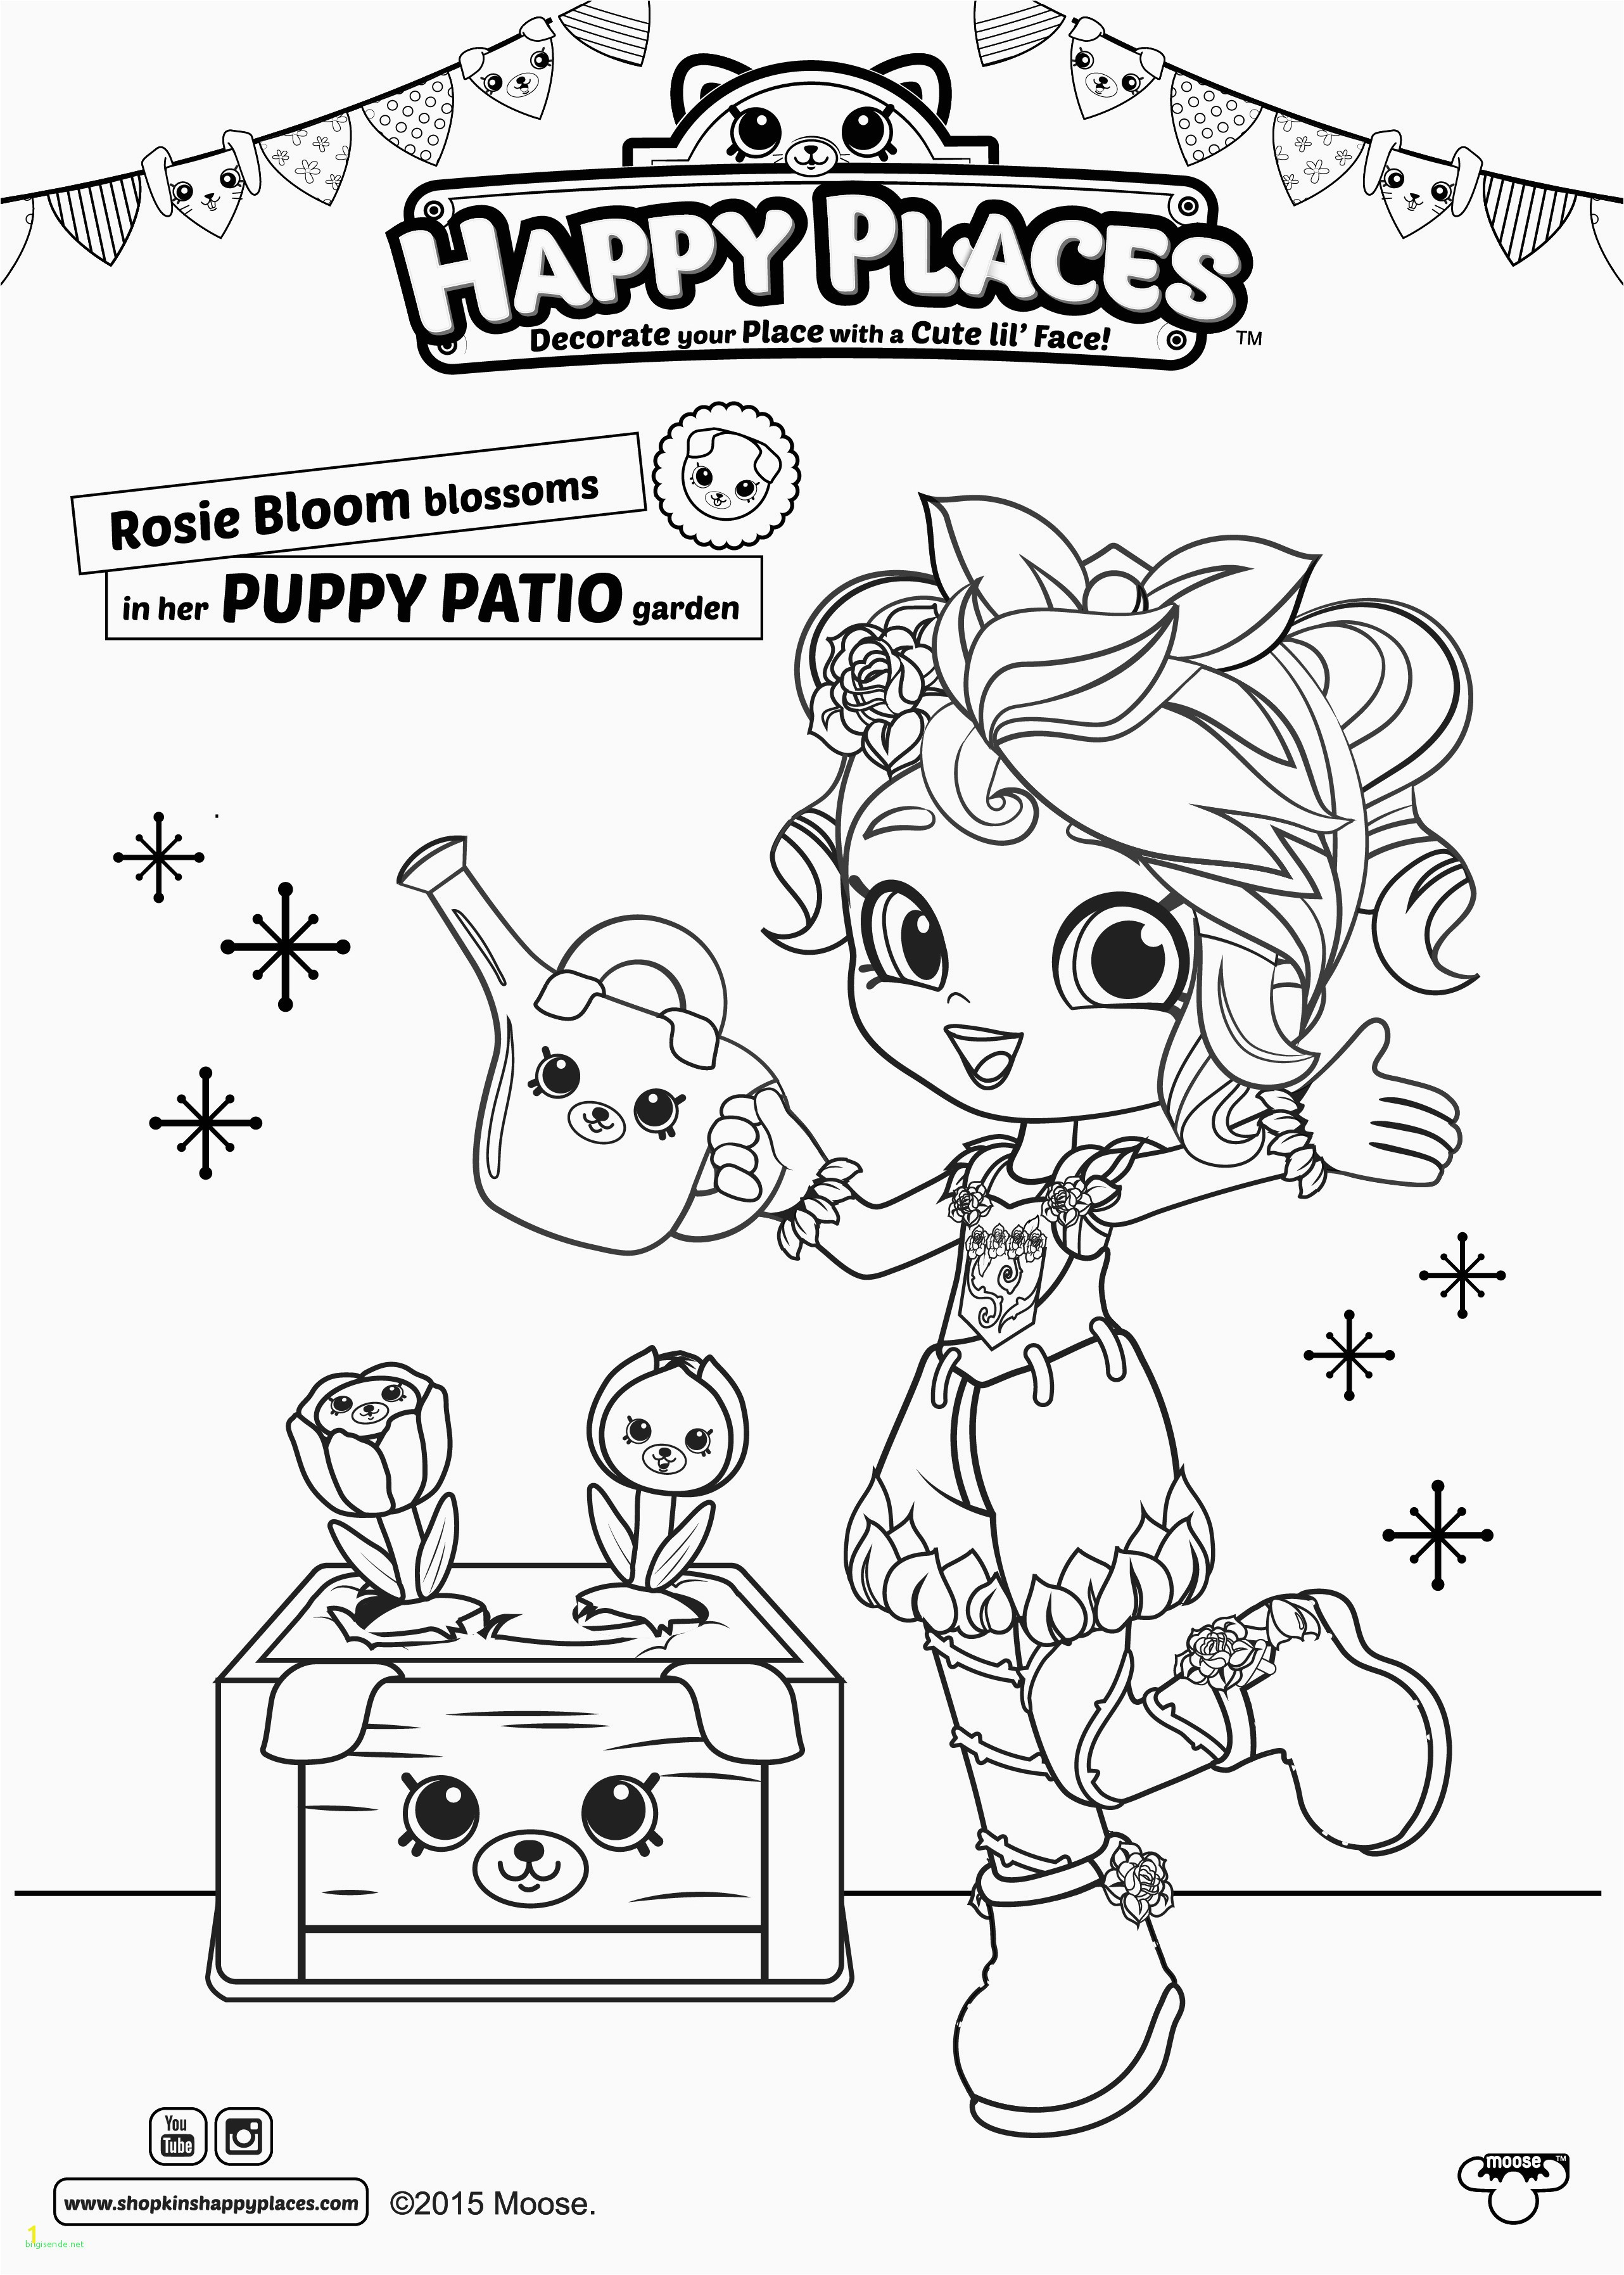 Nail Polish Coloring Page Luxury Coloring Pages for Girls Shopkins Printable Coloring Sheet